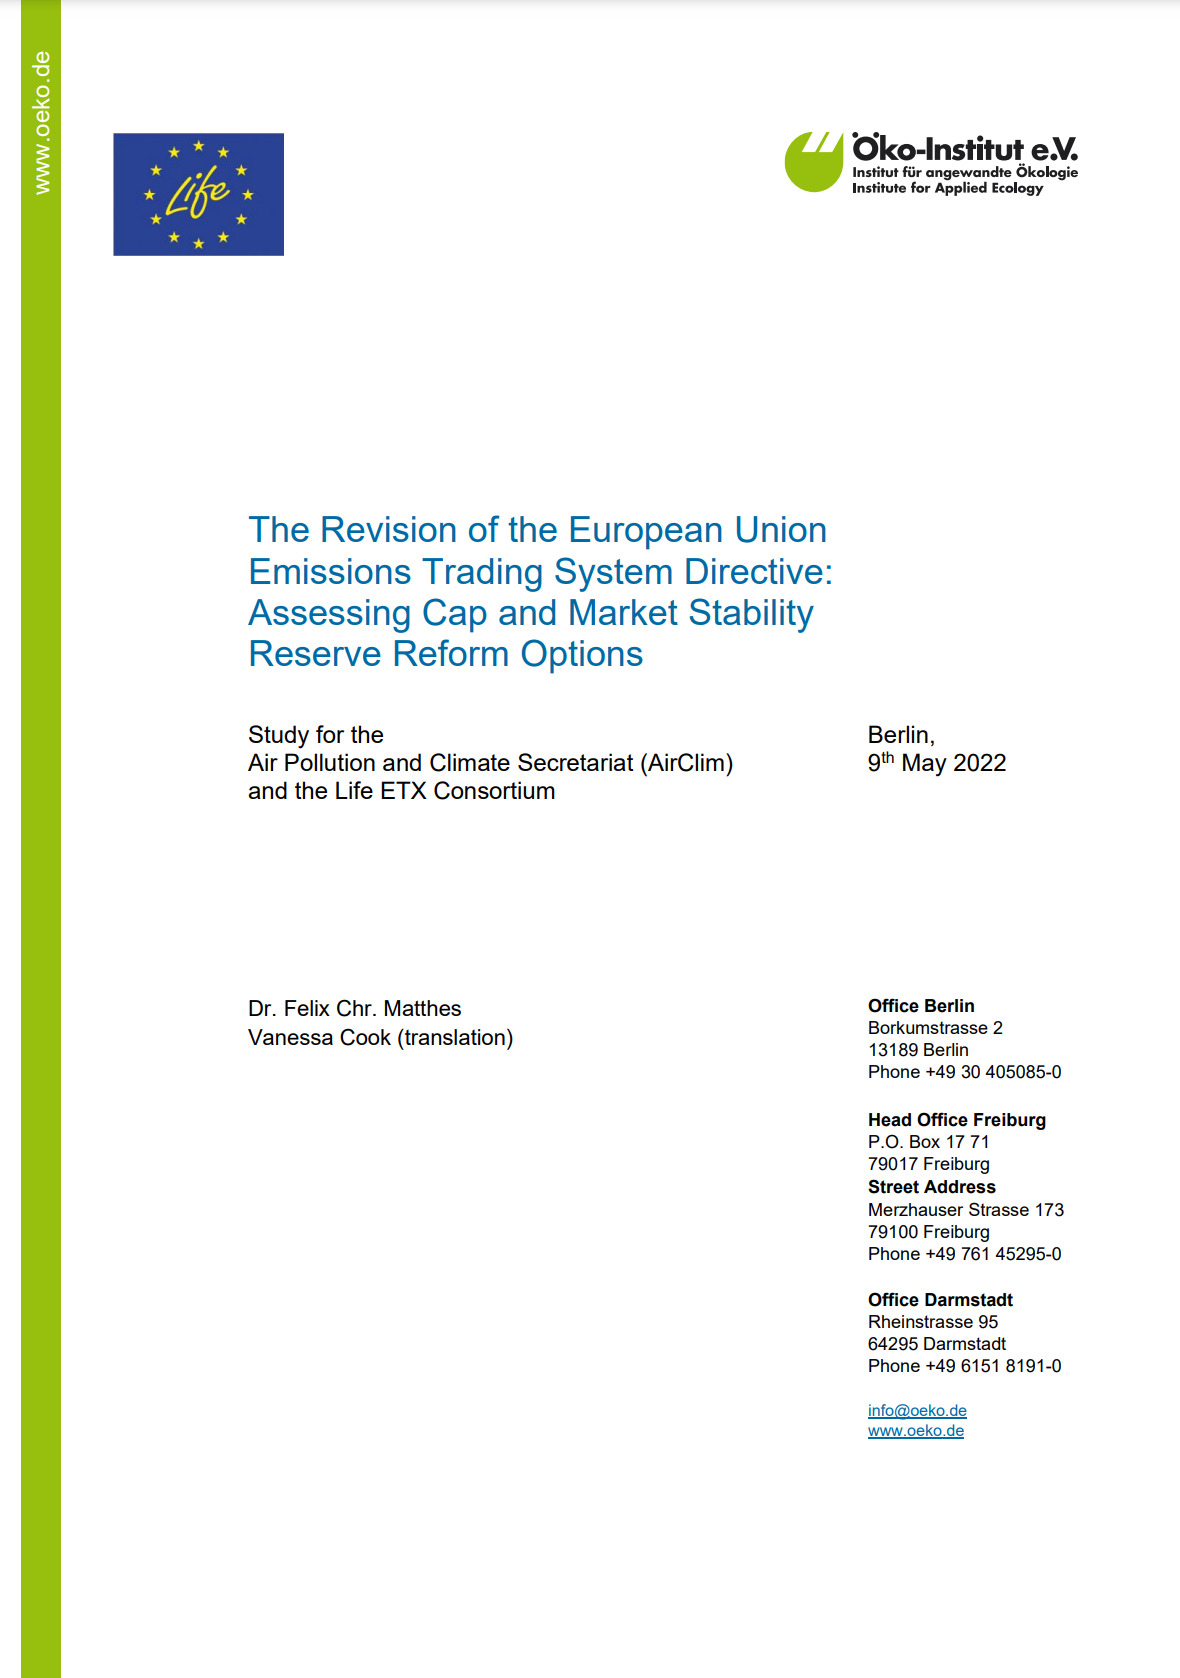 The Revision of the European Union Emissions Trading System Directive: Assessing Cap and Market Stability Reserve Reform Options